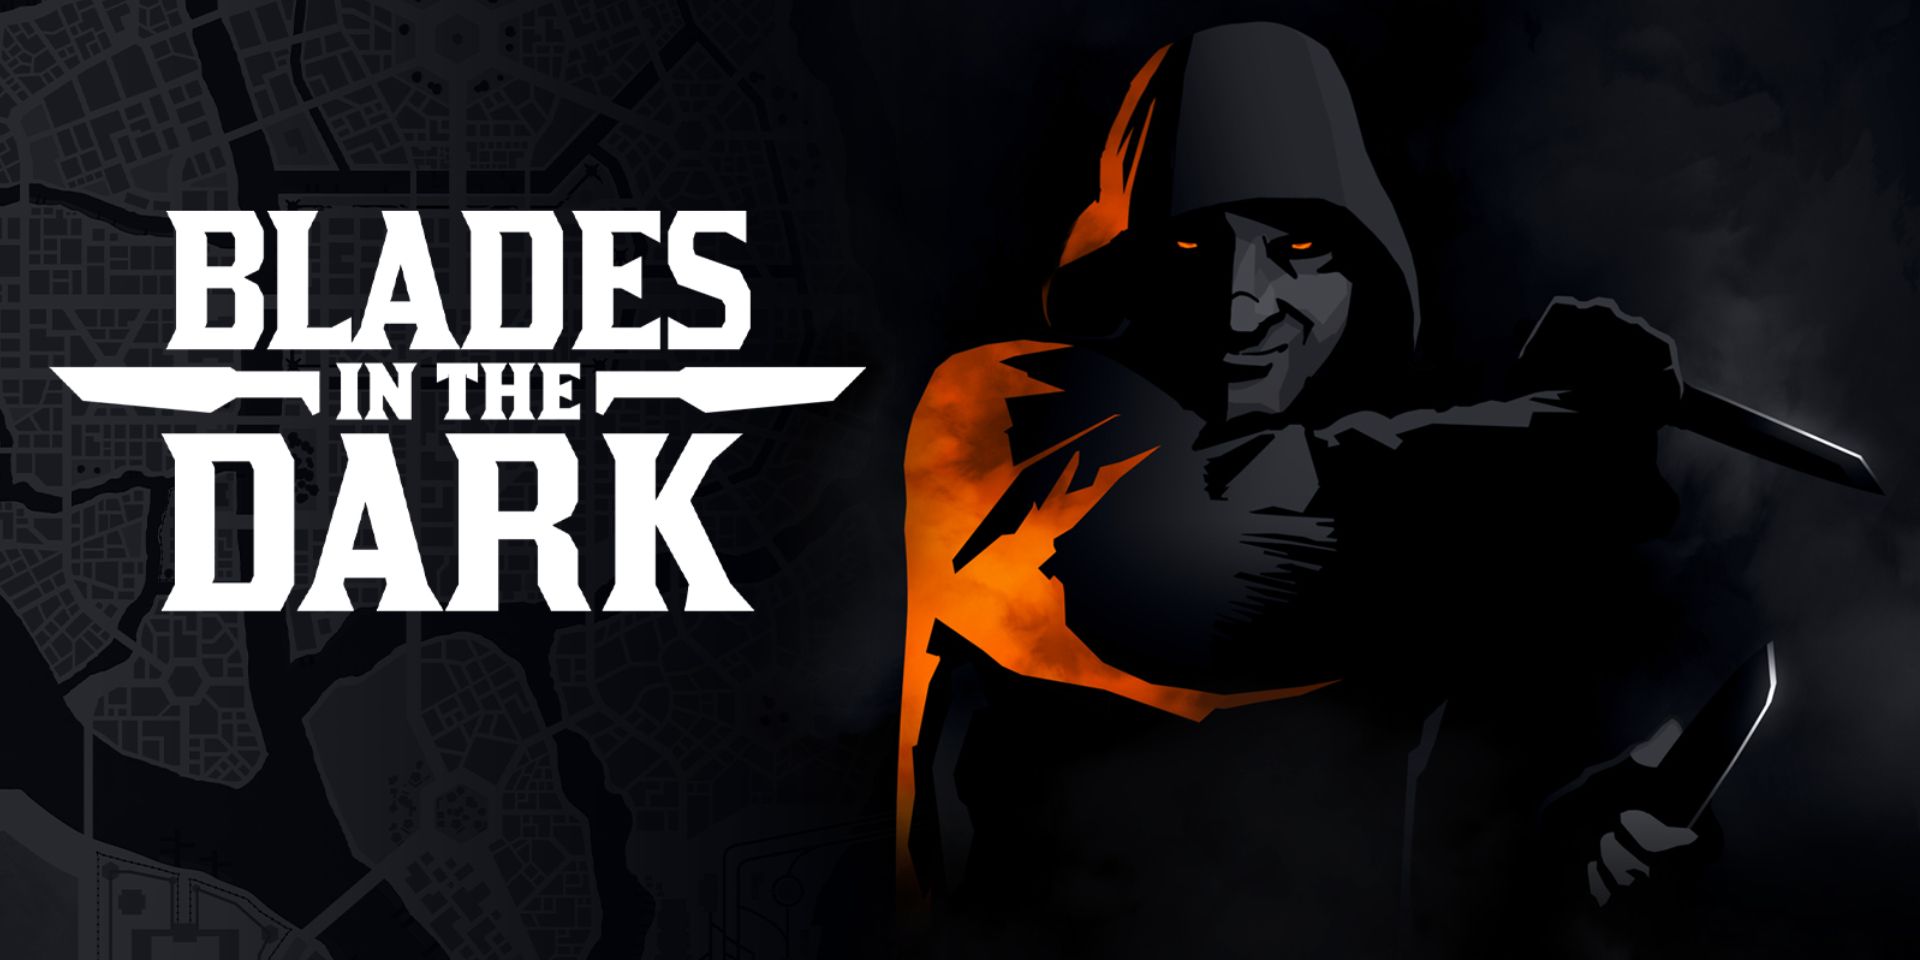 Blades In The Dark title on left with drawn assassin character in a hood carrying knives on right